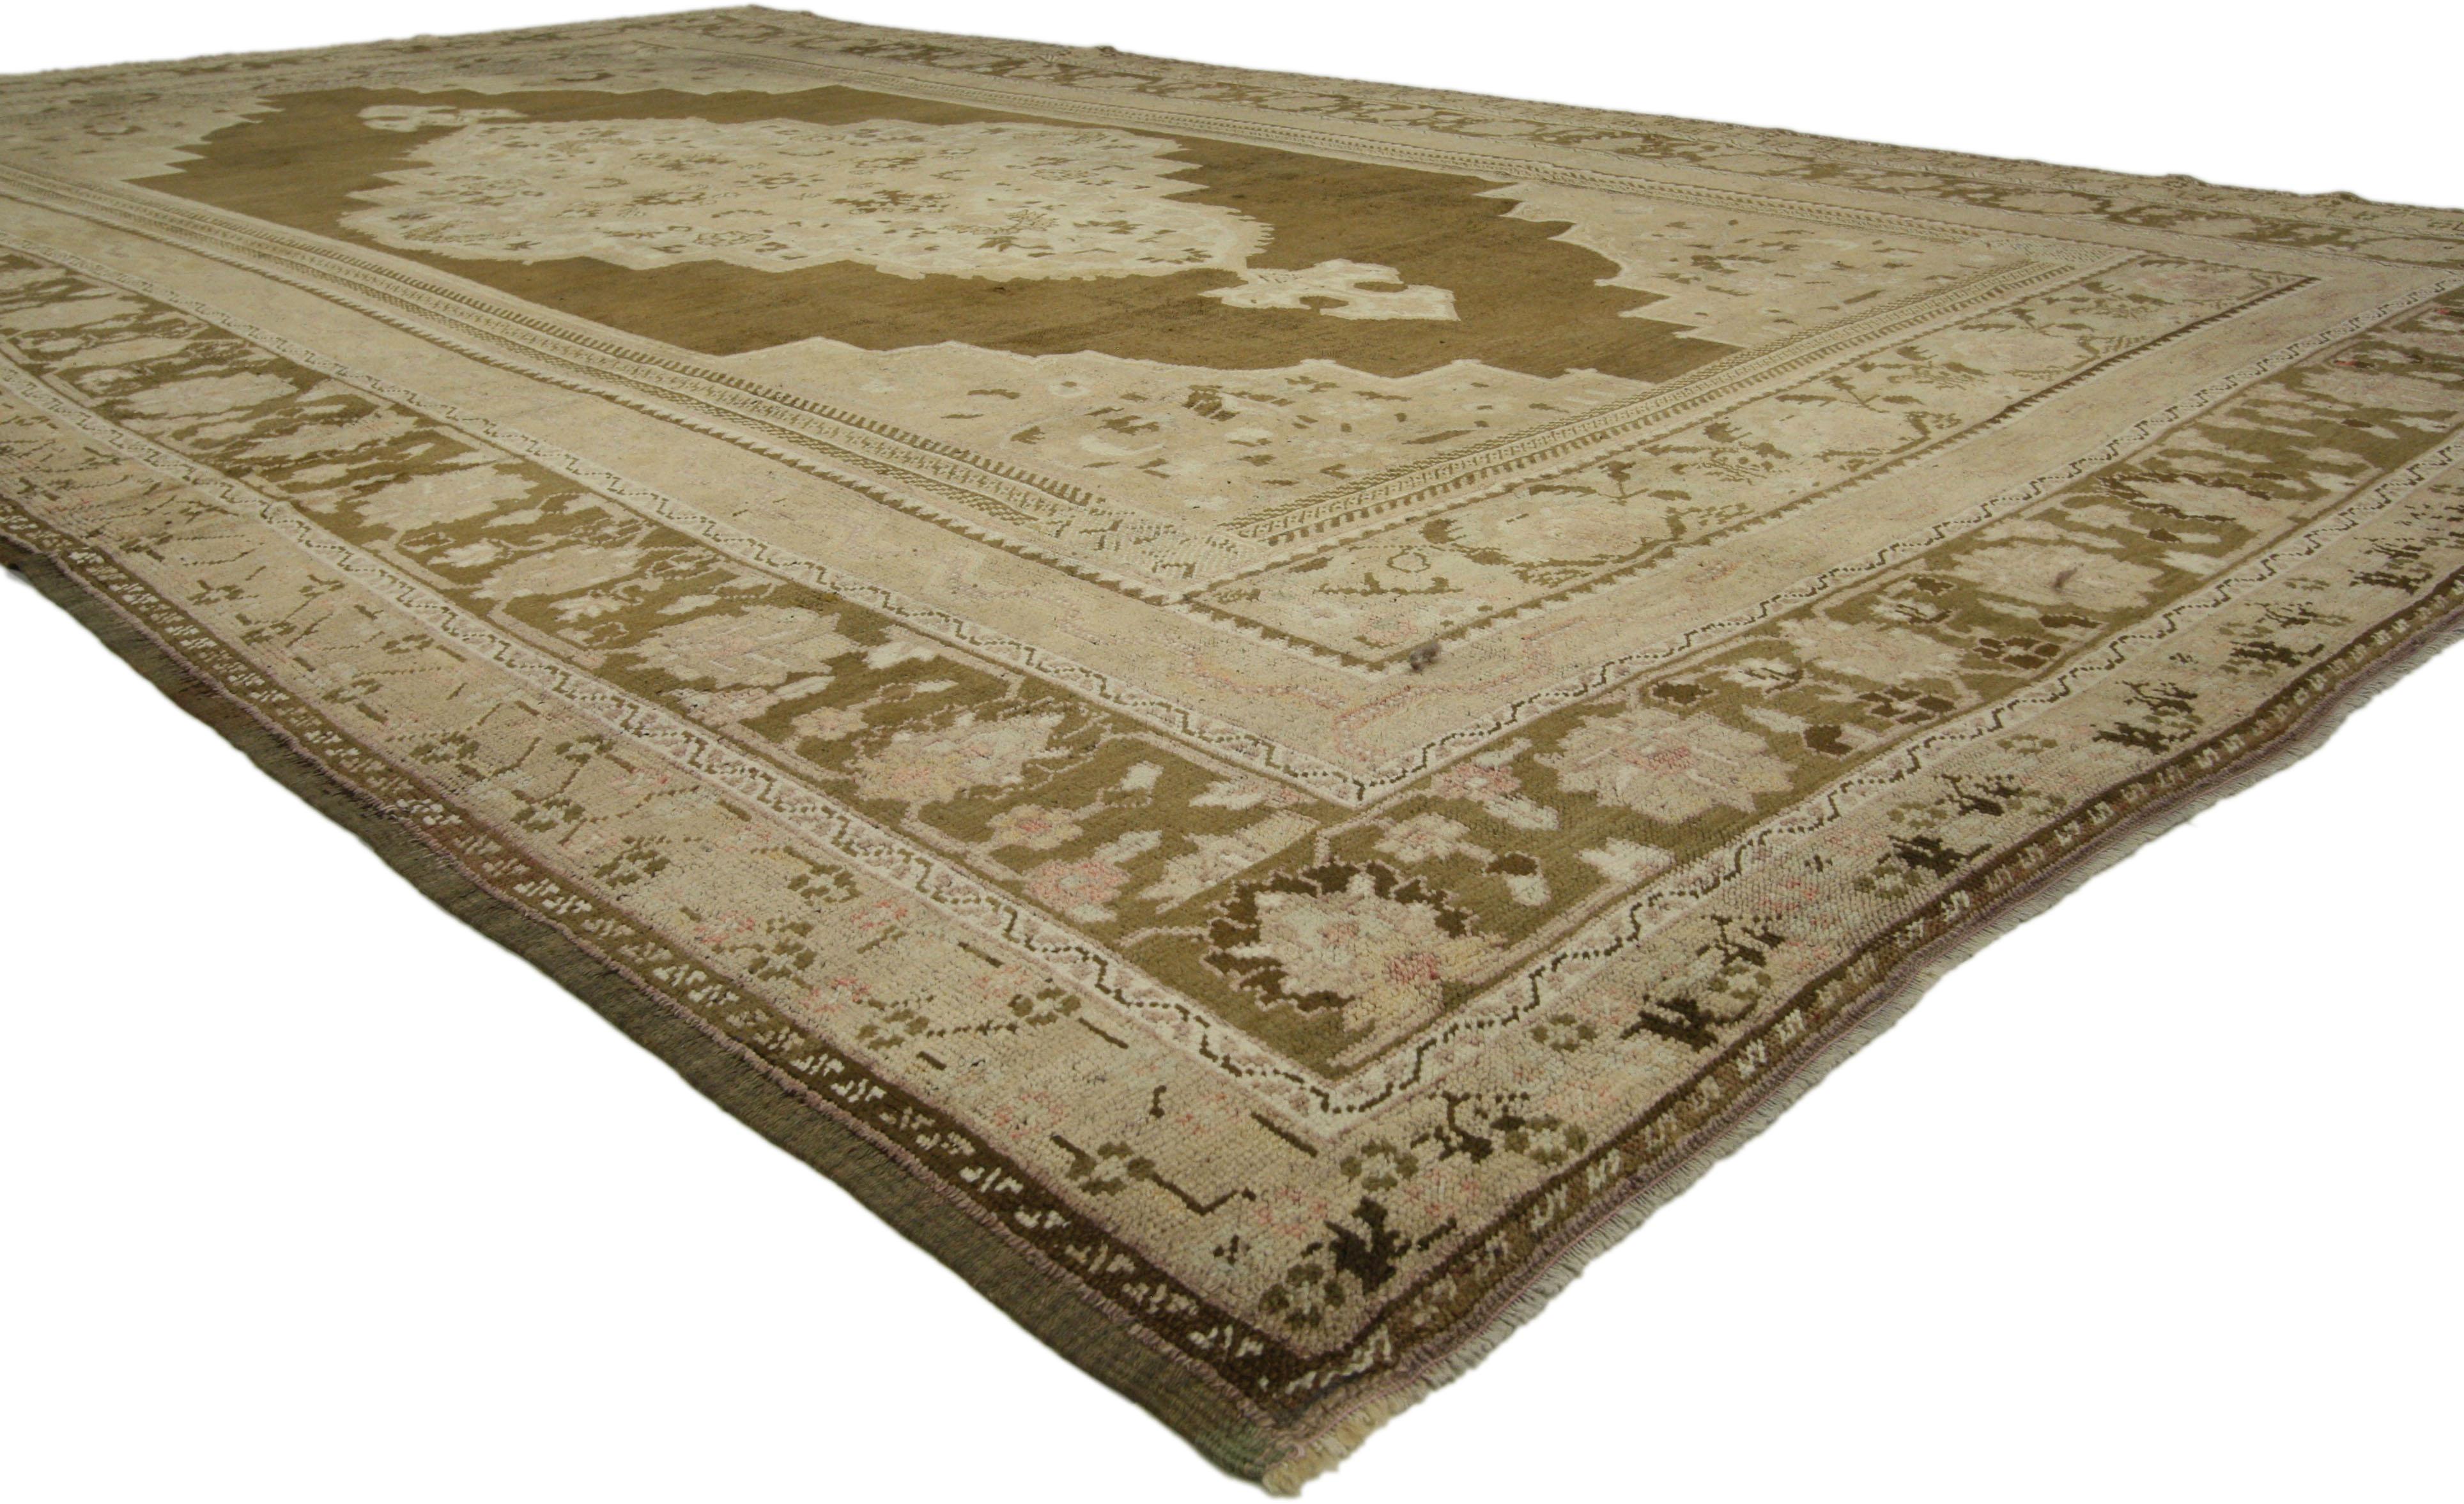 50504 Vintage Turkish Oushak rug with Warm Luxury Russian Home Style 07'08 X 13'02. This hand knotted wool vintage Turkish Oushak rug blends traditional elegance with a farmhouse adding charm and perfect combination of warmth and luxury. The centre